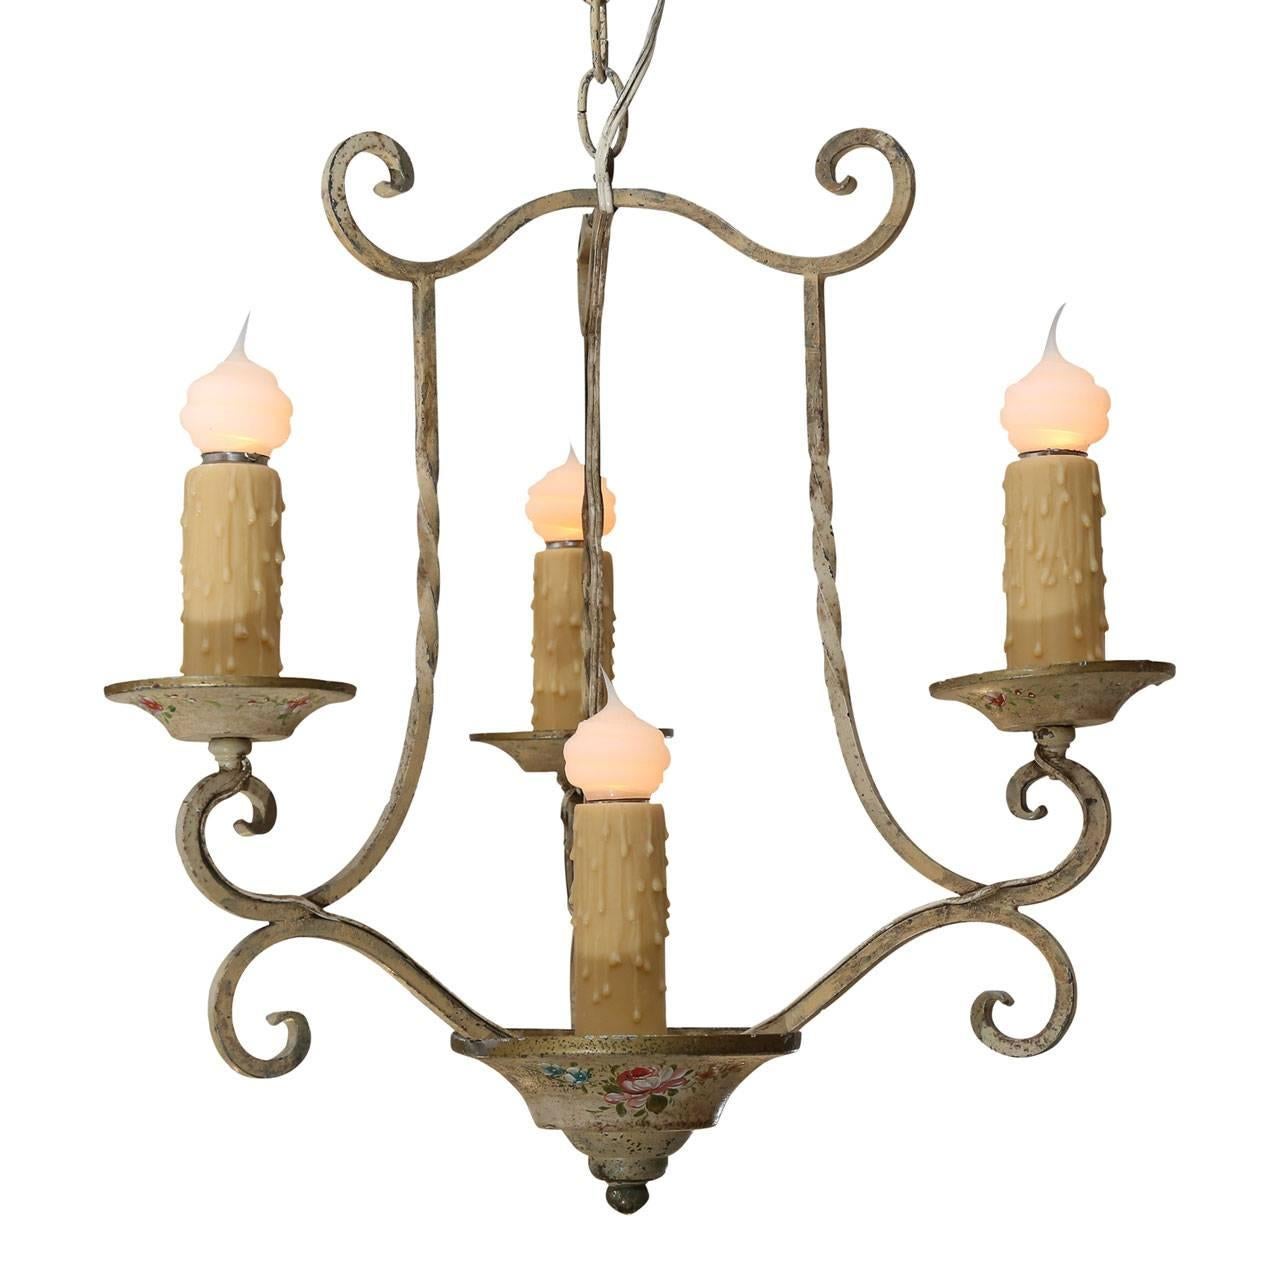 Hand-Painted Vintage Painted Iron Chandelier from France